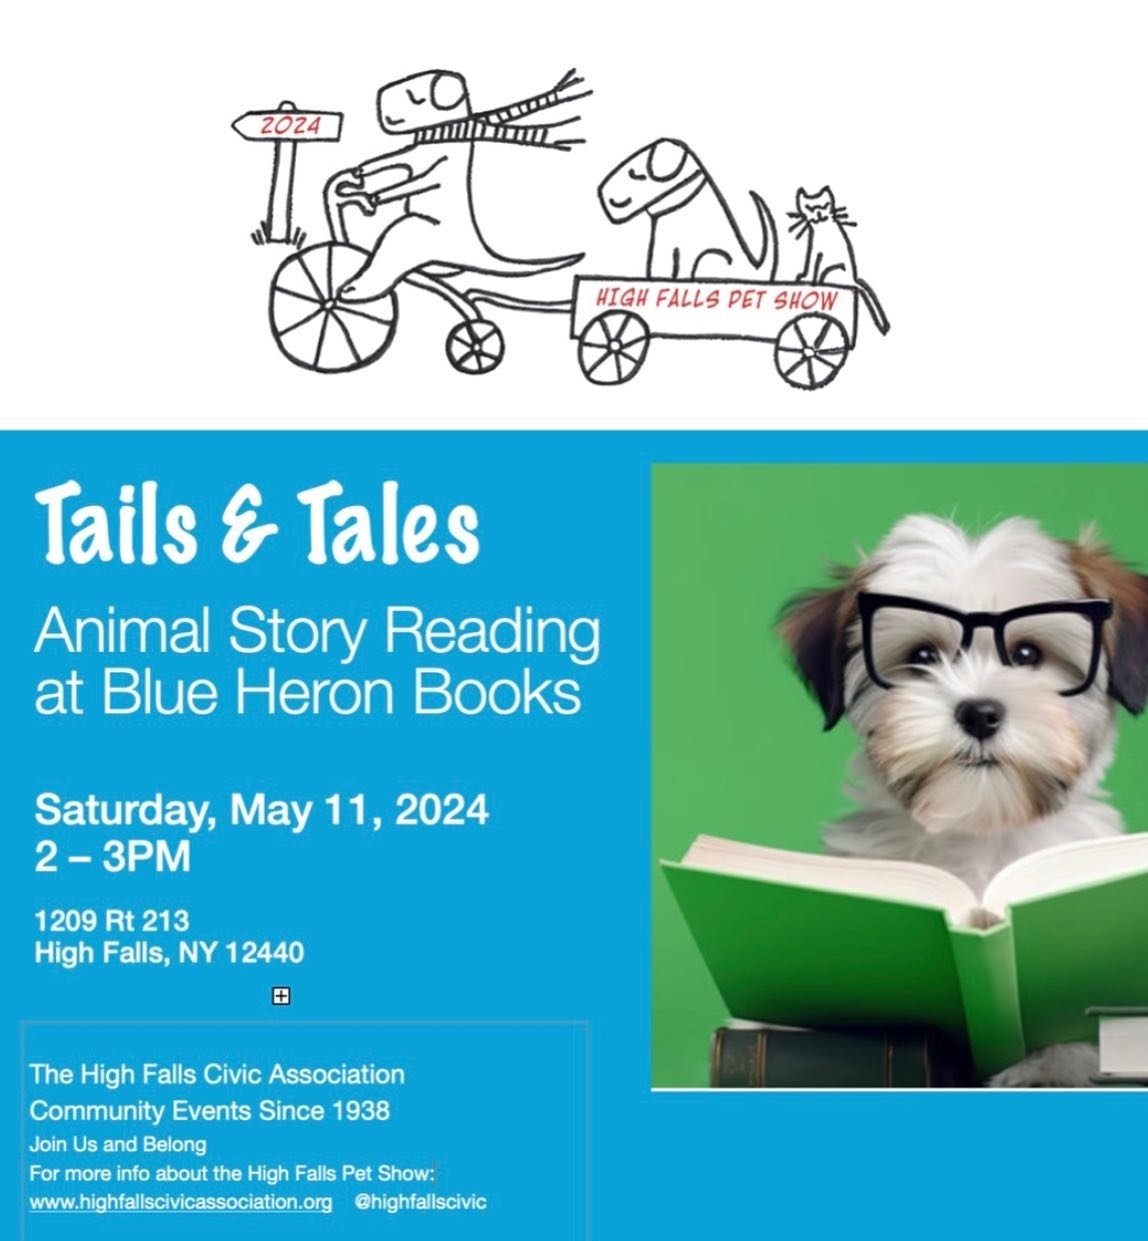 Calling all kiddies❤️ After the excitement of the High Falls Pet Show this Saturday 5/11, Blue Heron books is offering an hour of storytelling to children of all ages.

#reading #kiddies #books #storytelling #quiettime #readbooks #animalstories @blue